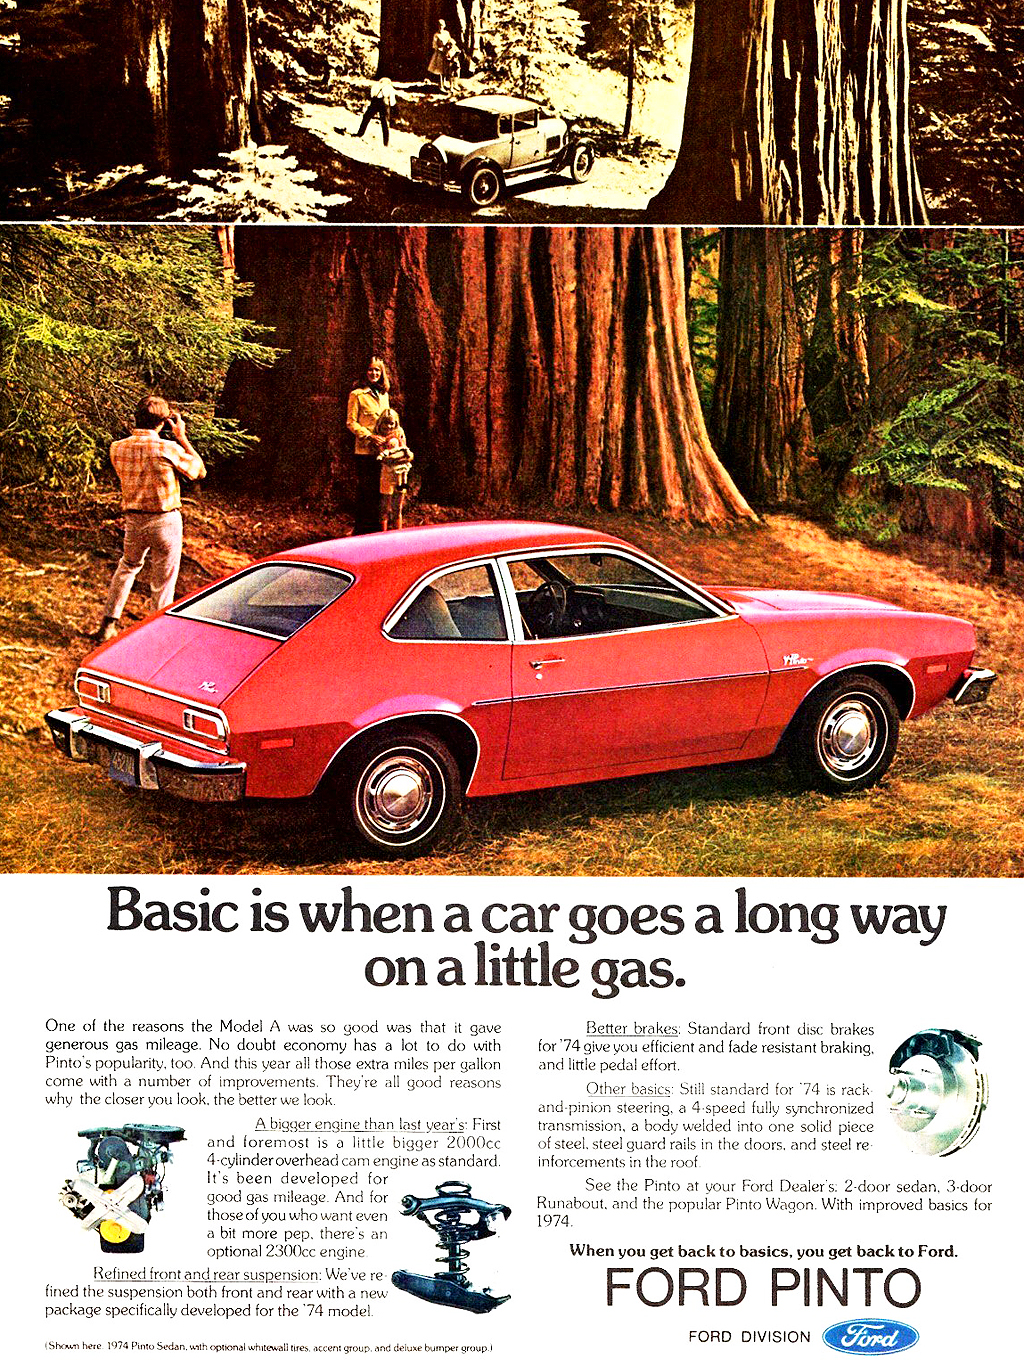 Ford pinto commercials #1